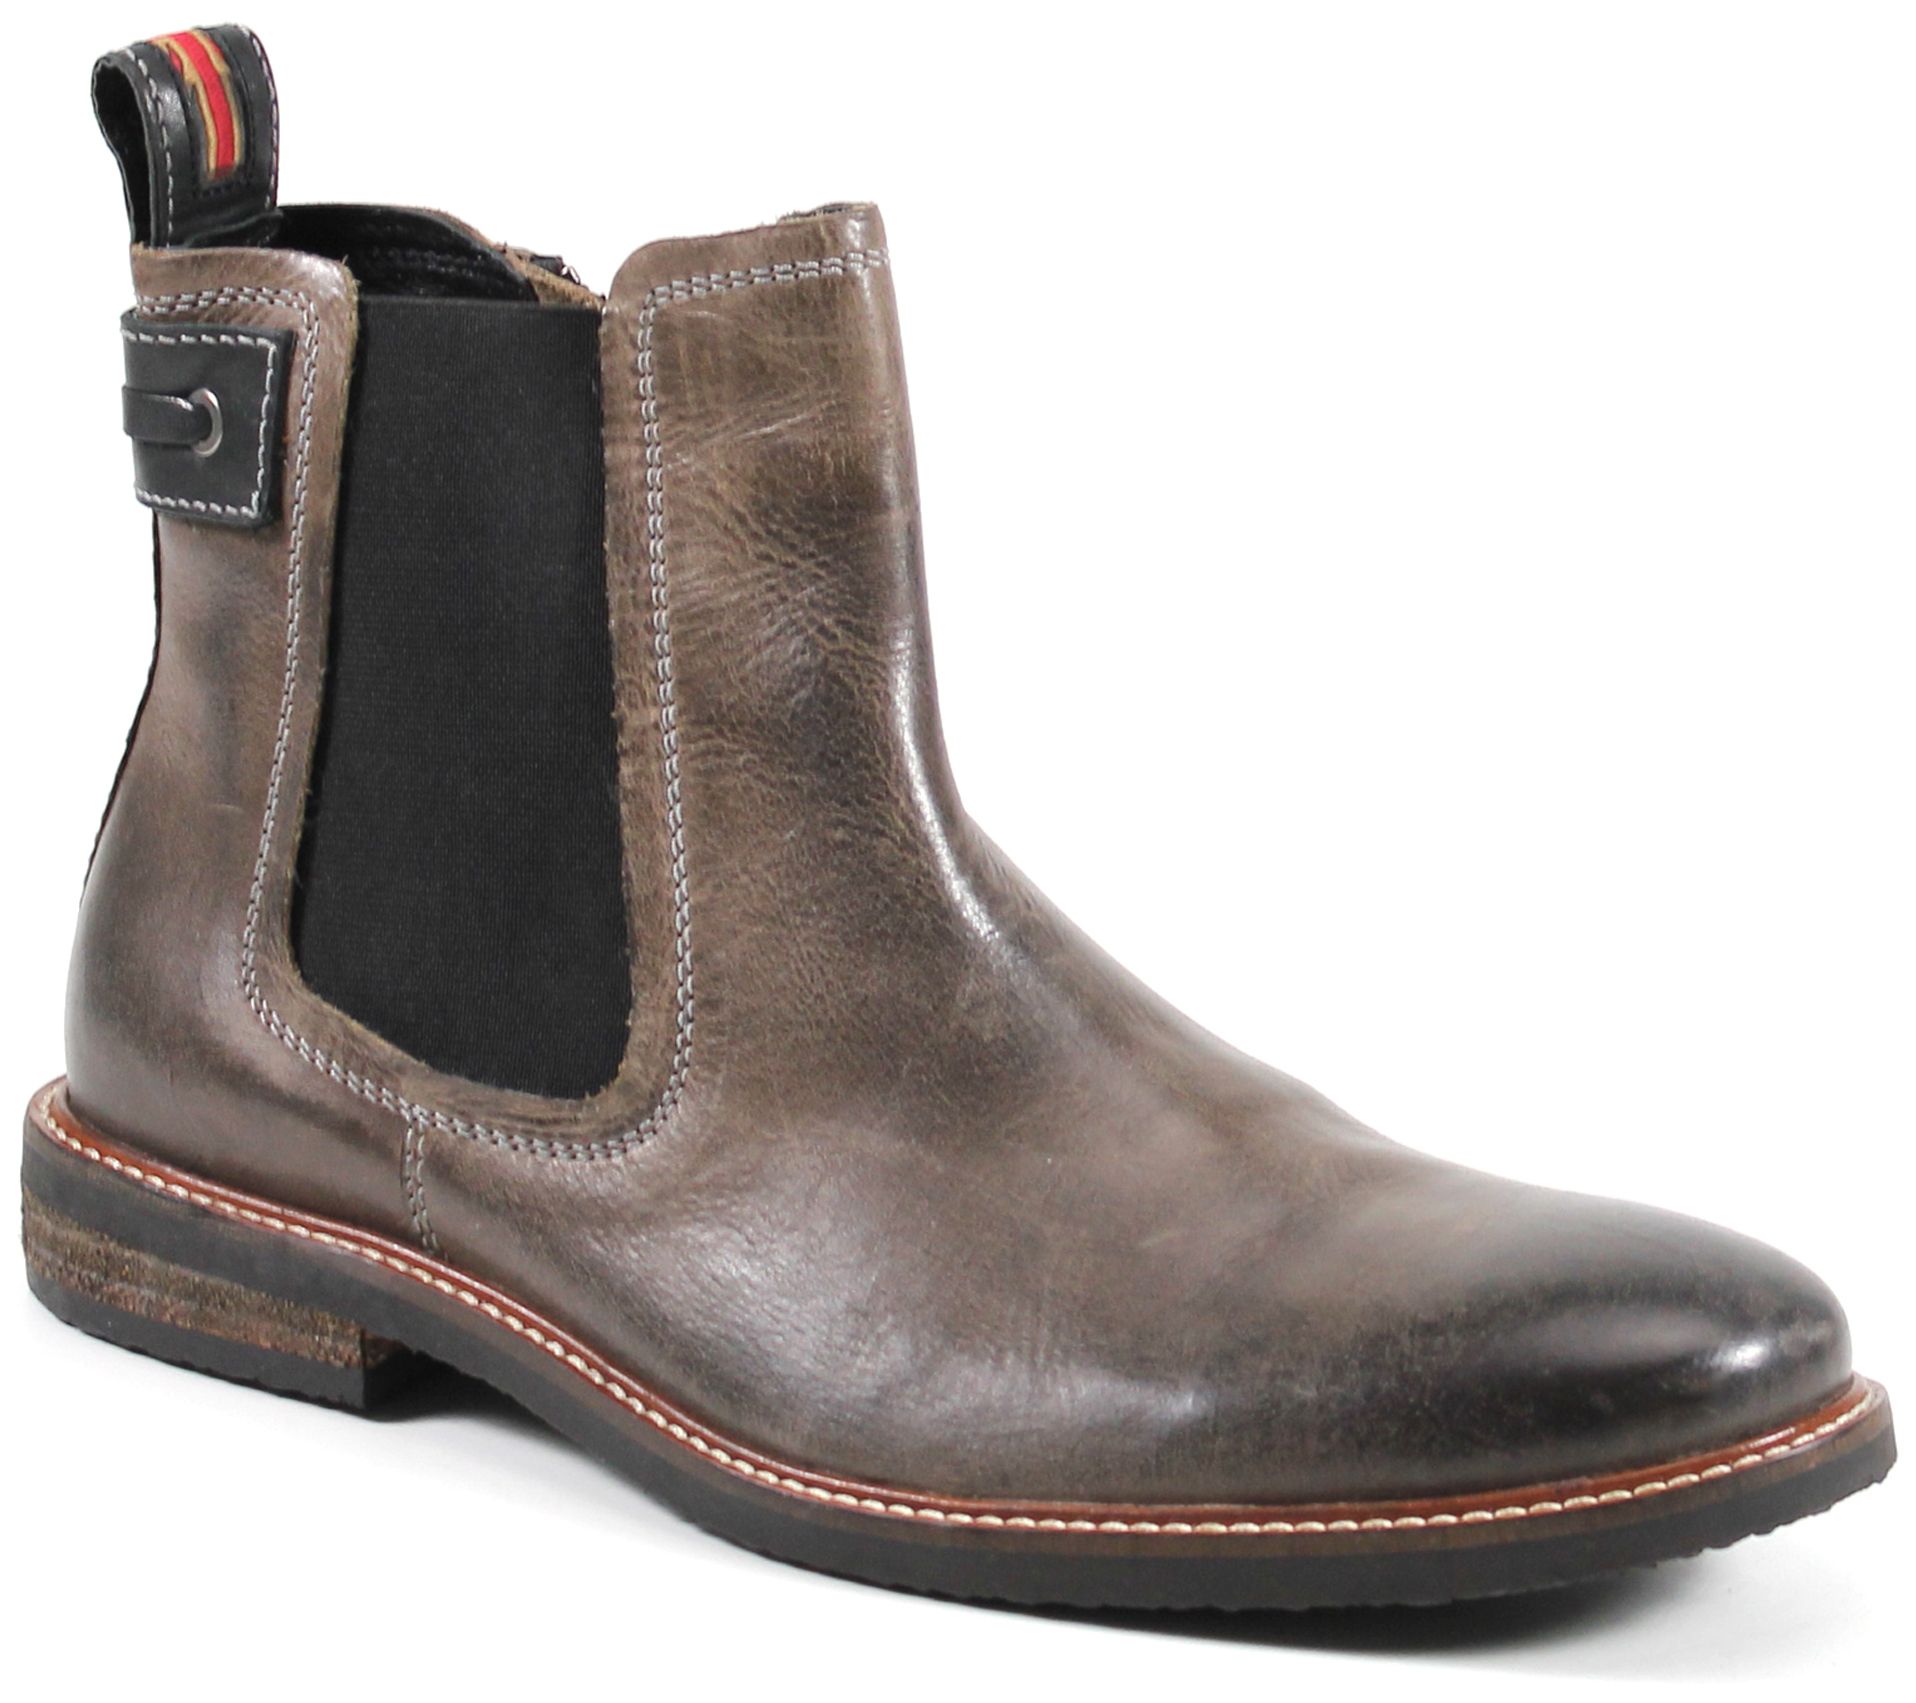 Testosterone Shoes Men's Side Zip Leather Boots- Arch Way II - QVC.com